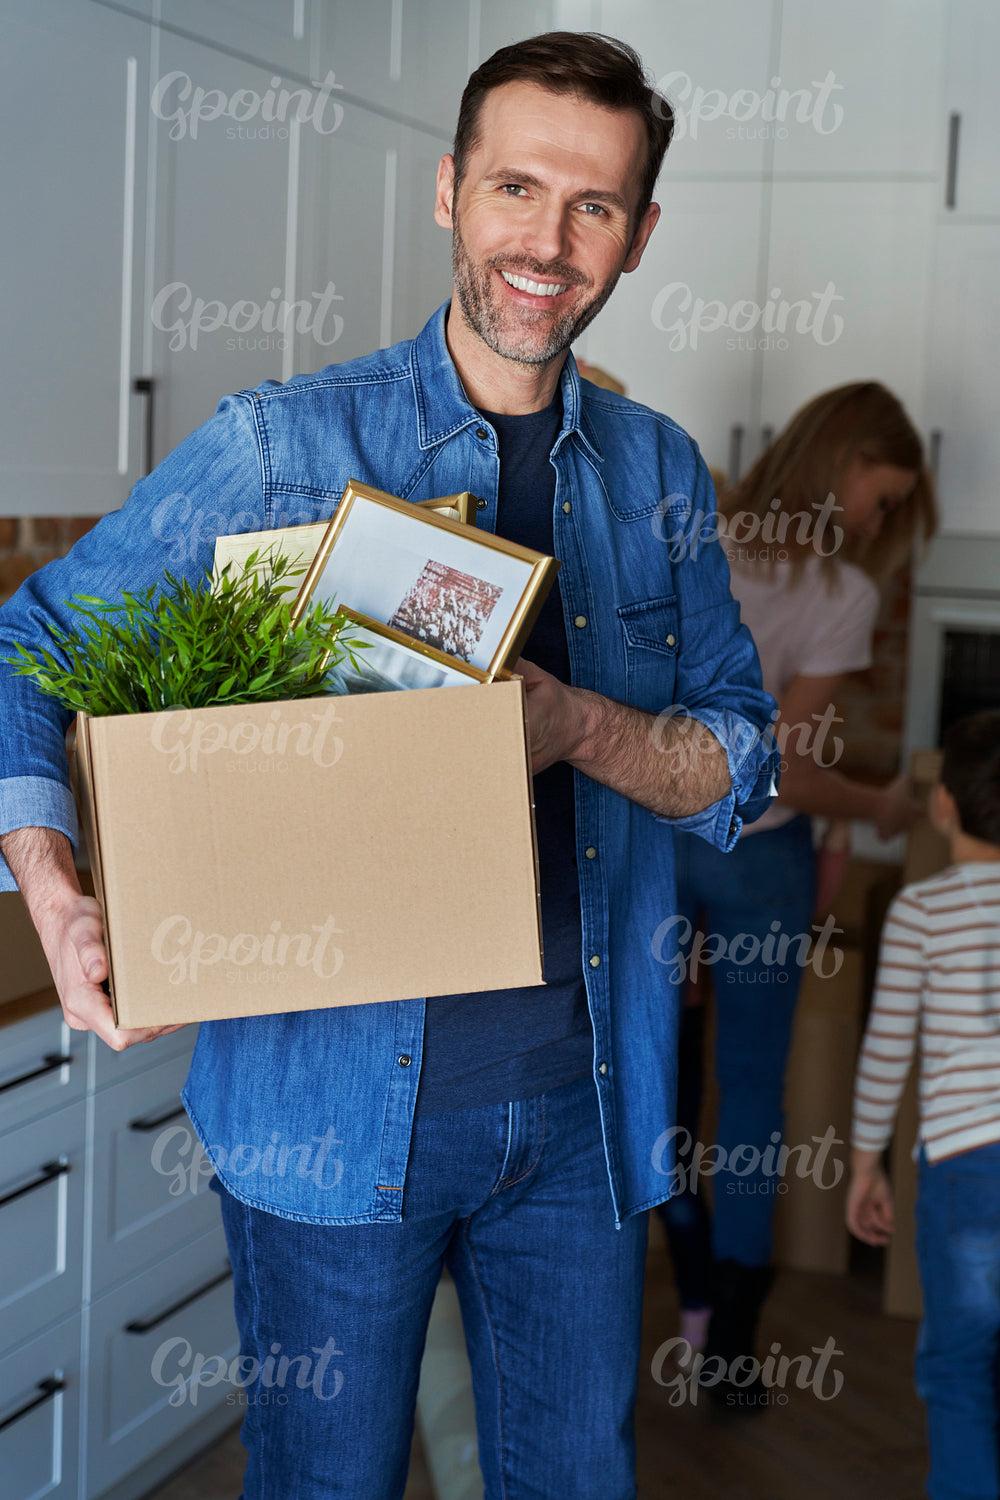 Portrait of smiling man holding cardboard box during moving